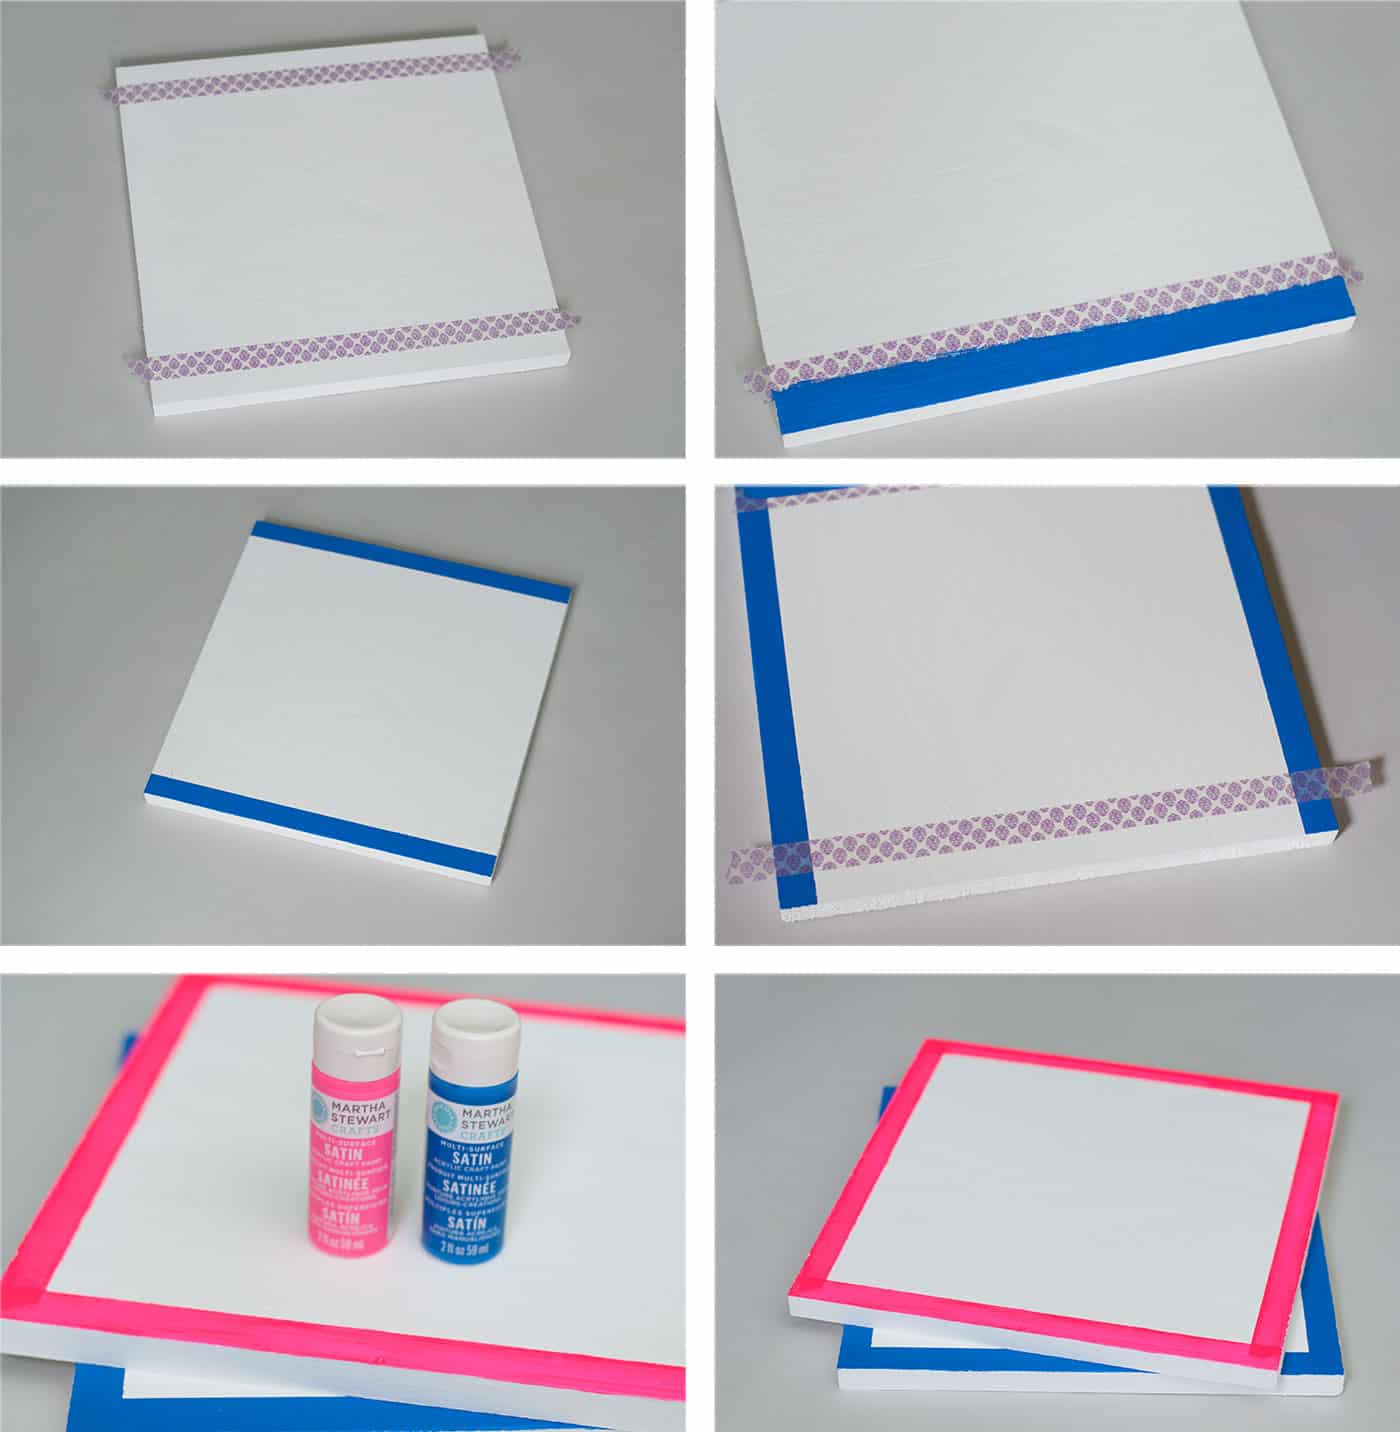 Taping off the edges of the white chalkboard and painting with pink and blue